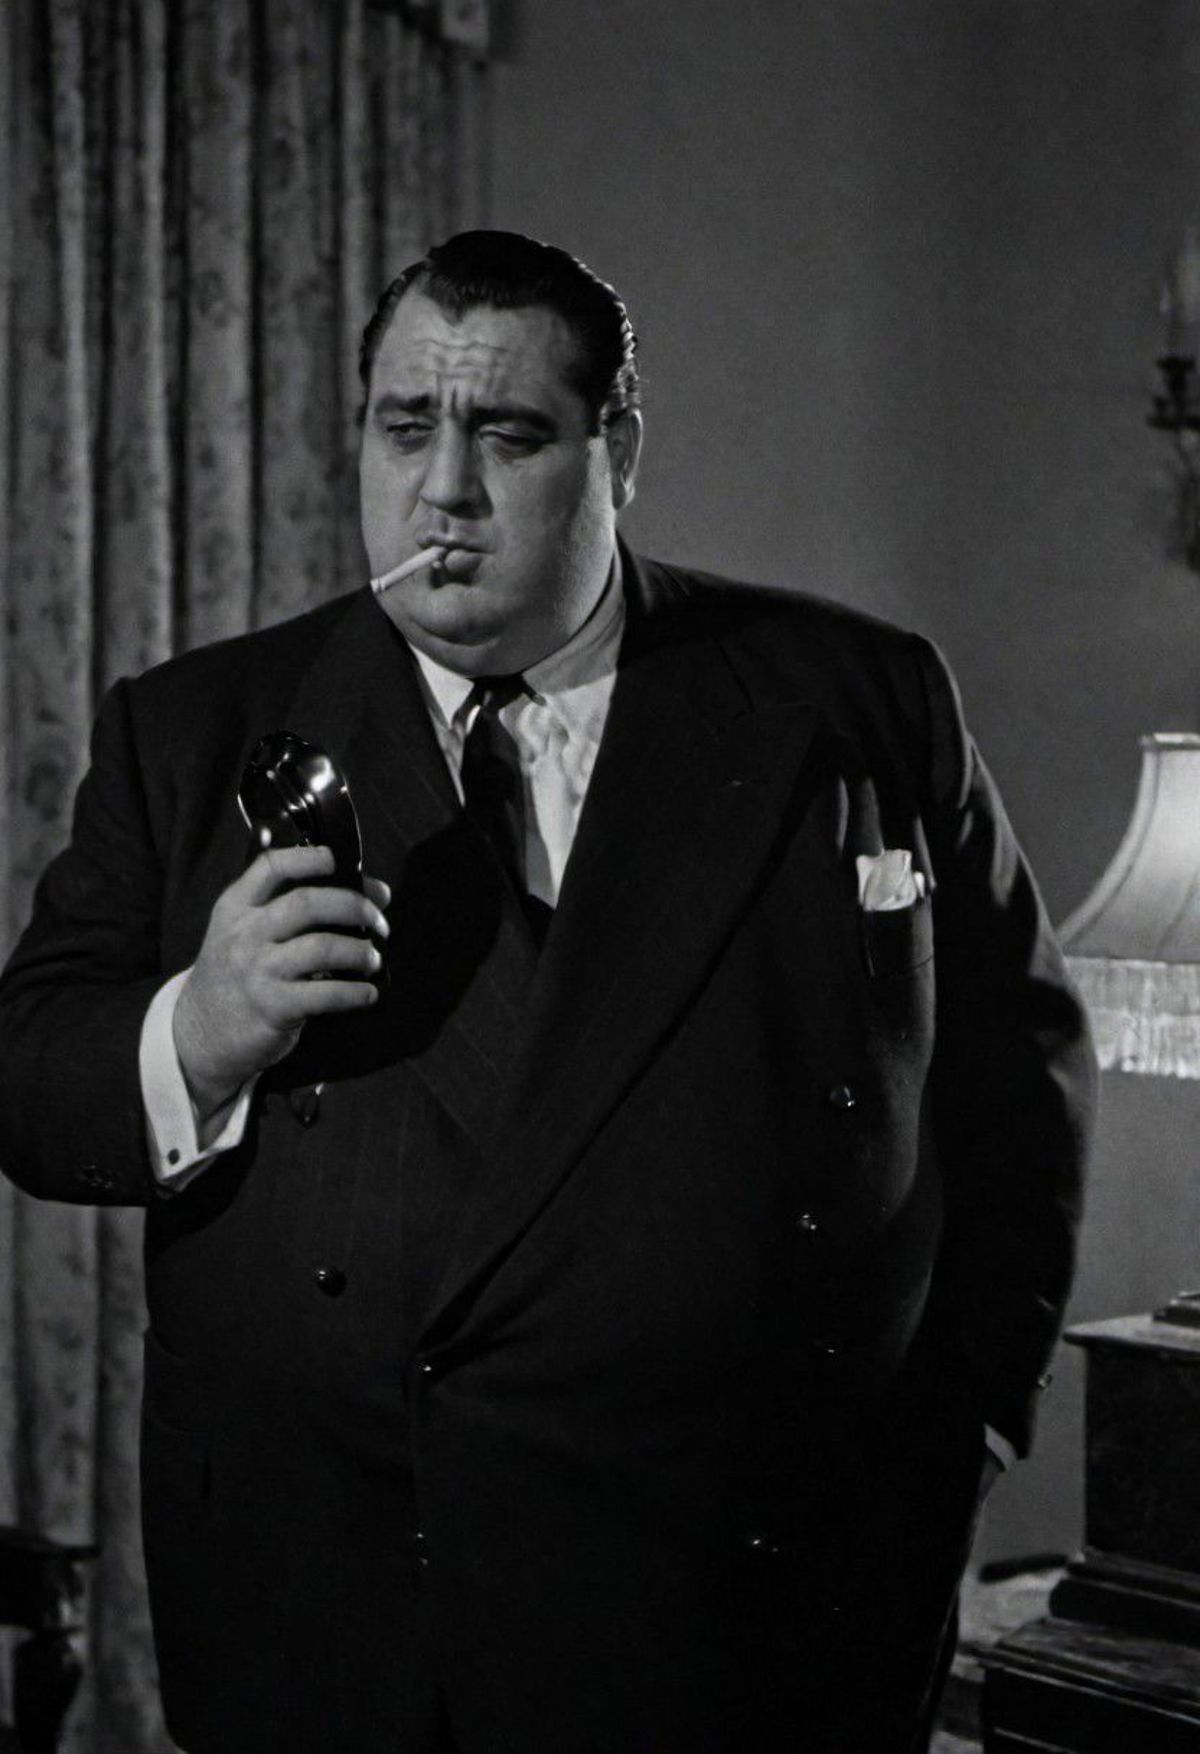 A man in a suit and tie smoking a cigarette.